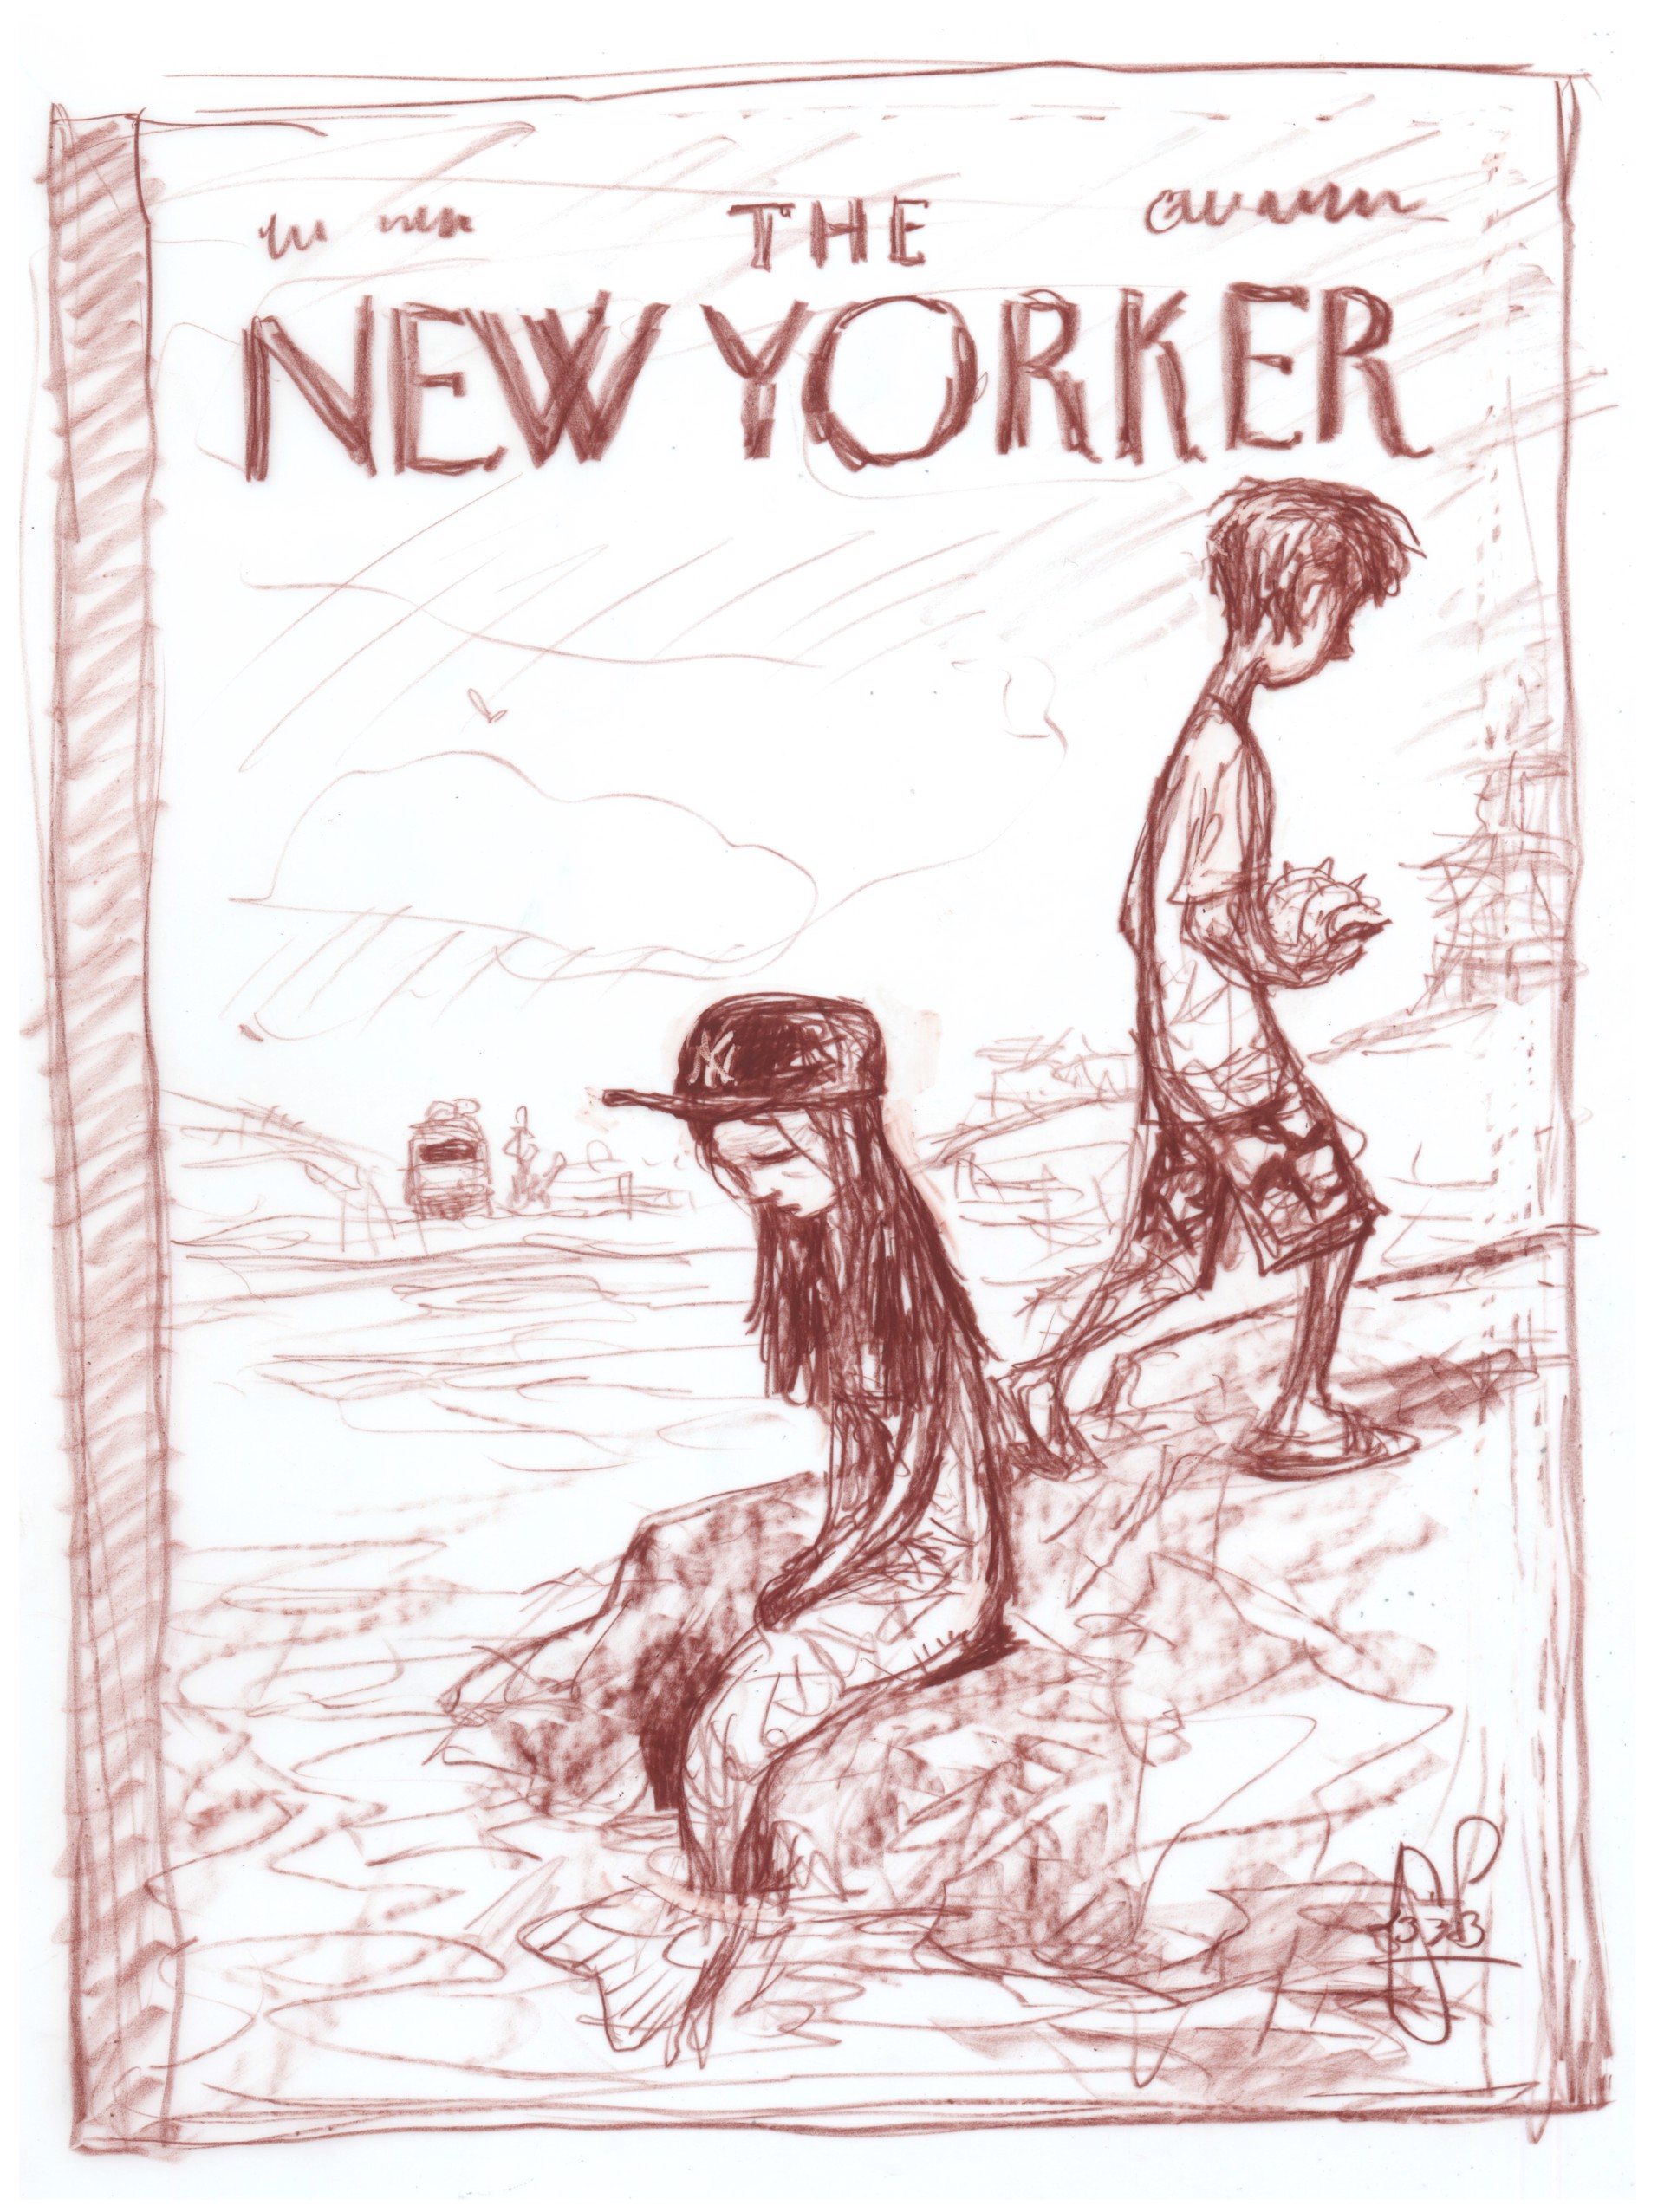 Proposed sketch for New Yorker cover "Summer's end" by Peter de Sève